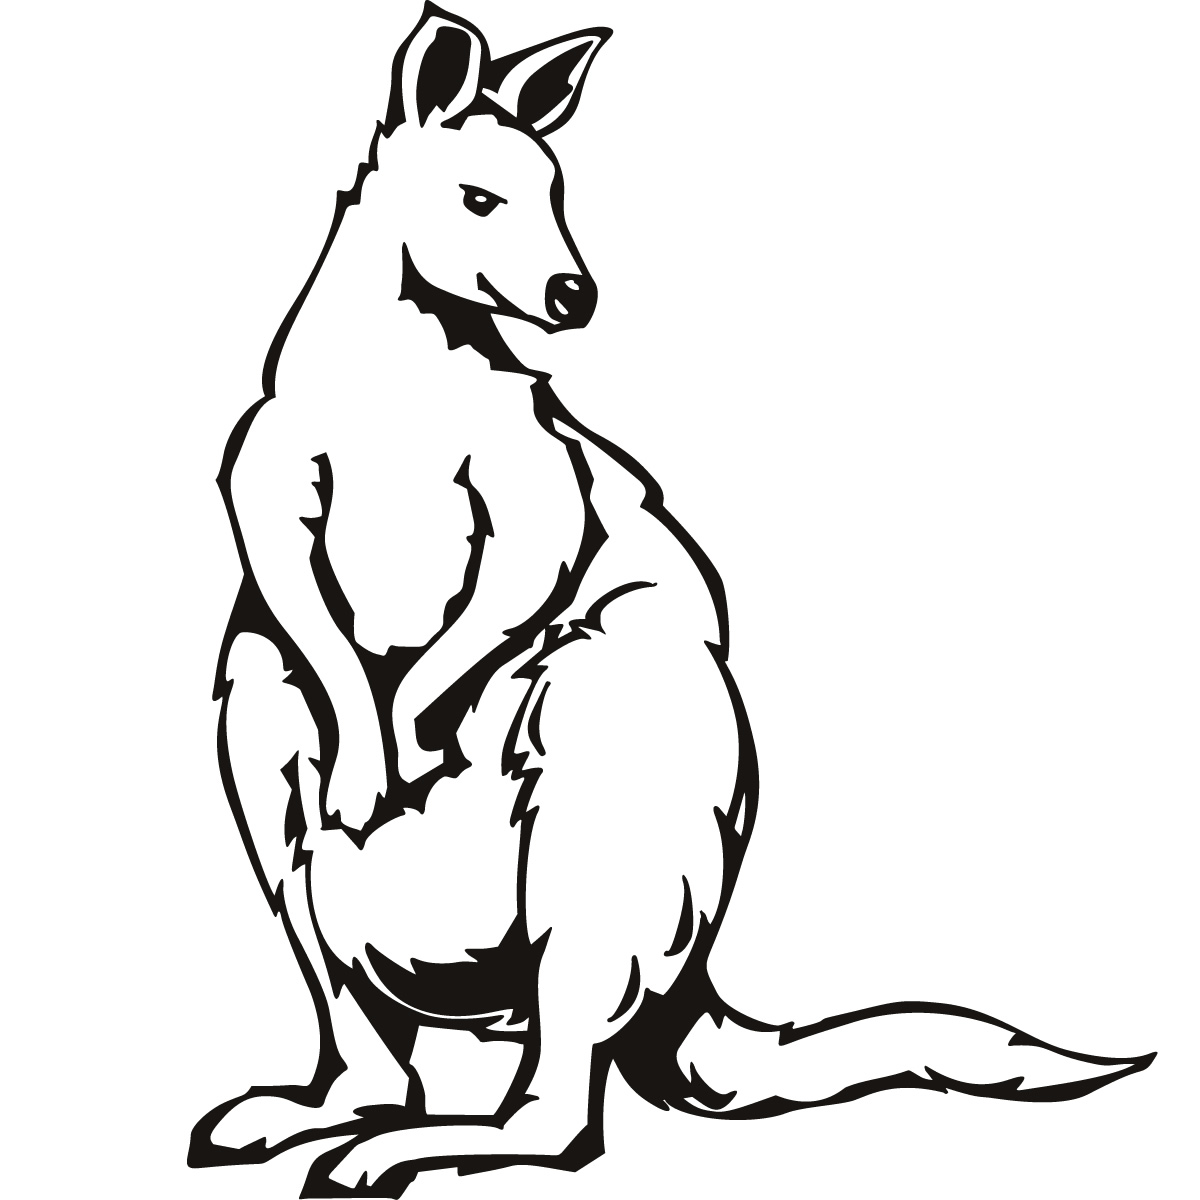 Kangaroo coloring pages for kids - Coloring Pages & Pictures - IMAGIXS